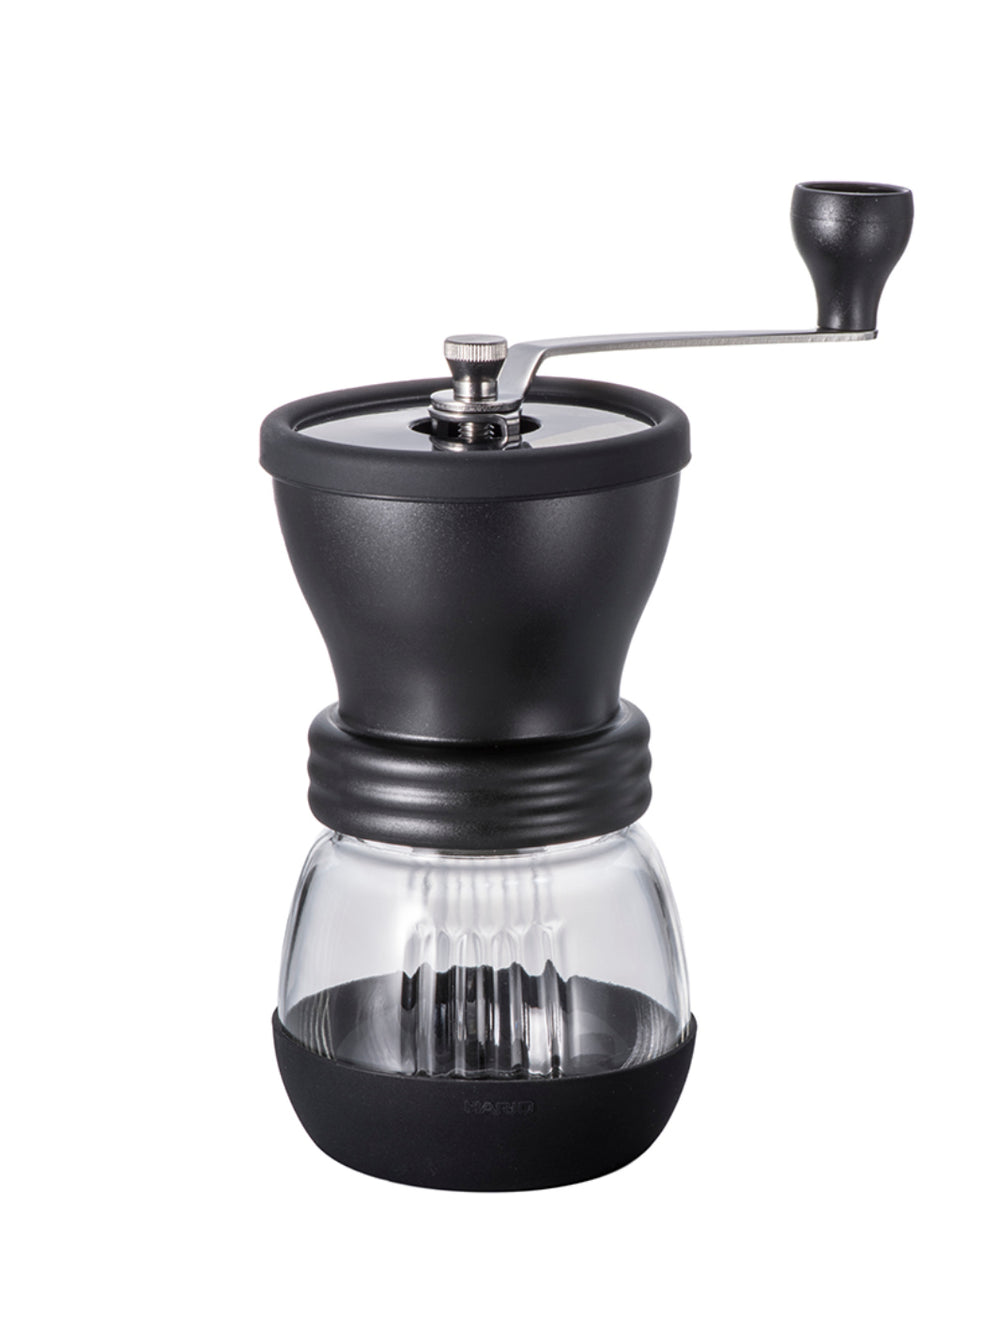 Hario Coffee Grinder, Canister Mill, Large Capacity 120 g.